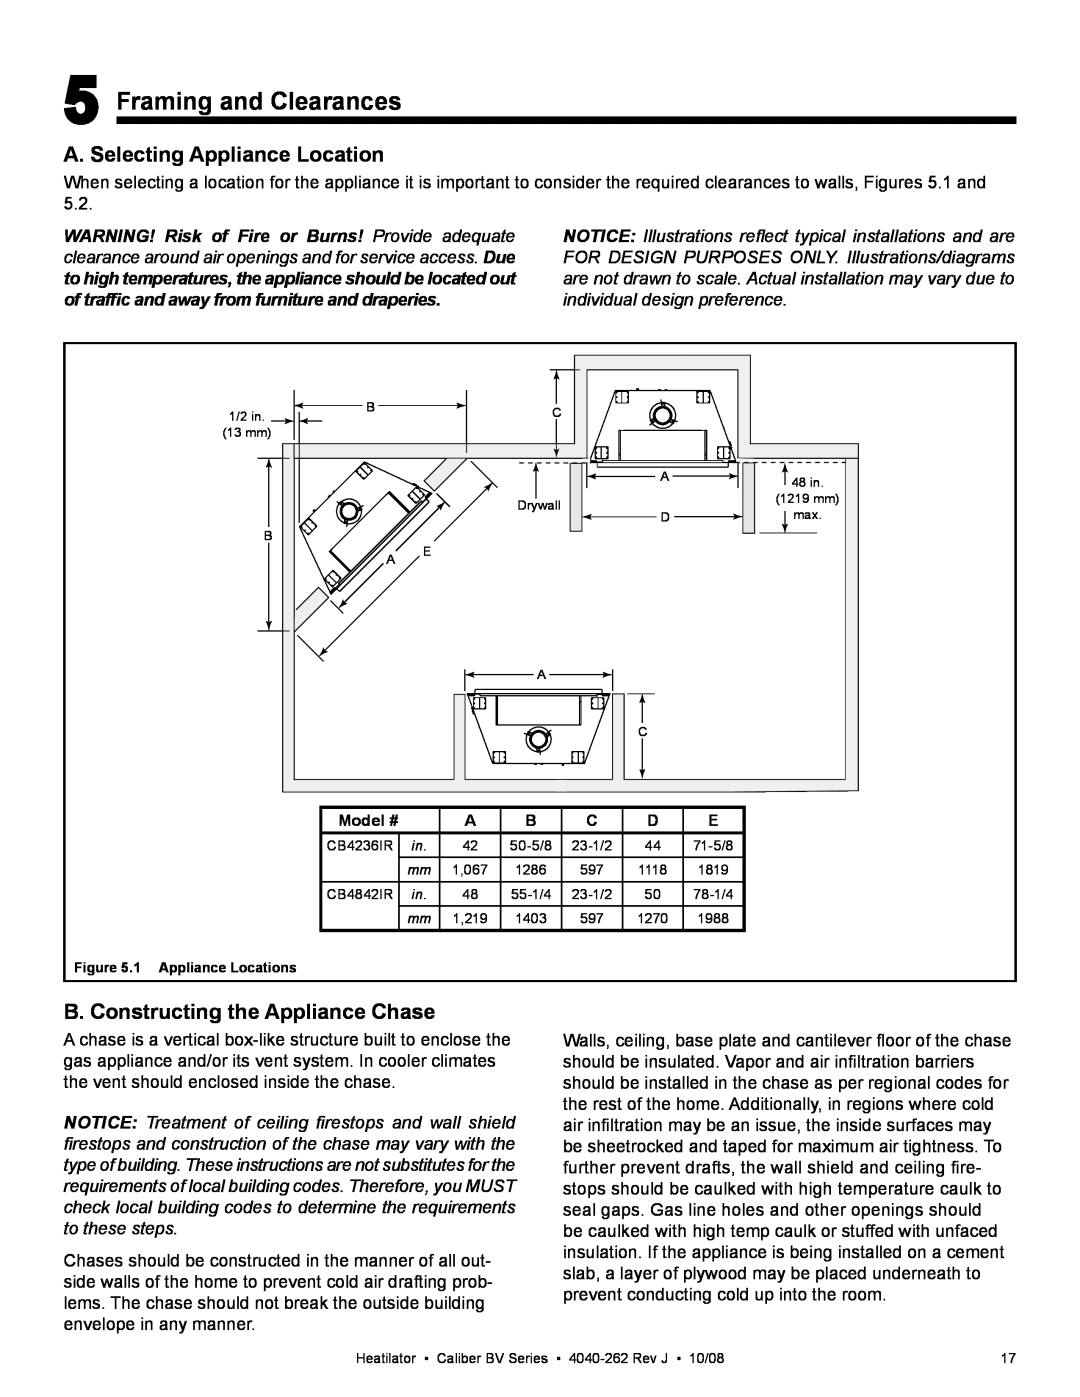 Hearth and Home Technologies CB4842IR, CB4236IR owner manual Framing and Clearances, A. Selecting Appliance Location 